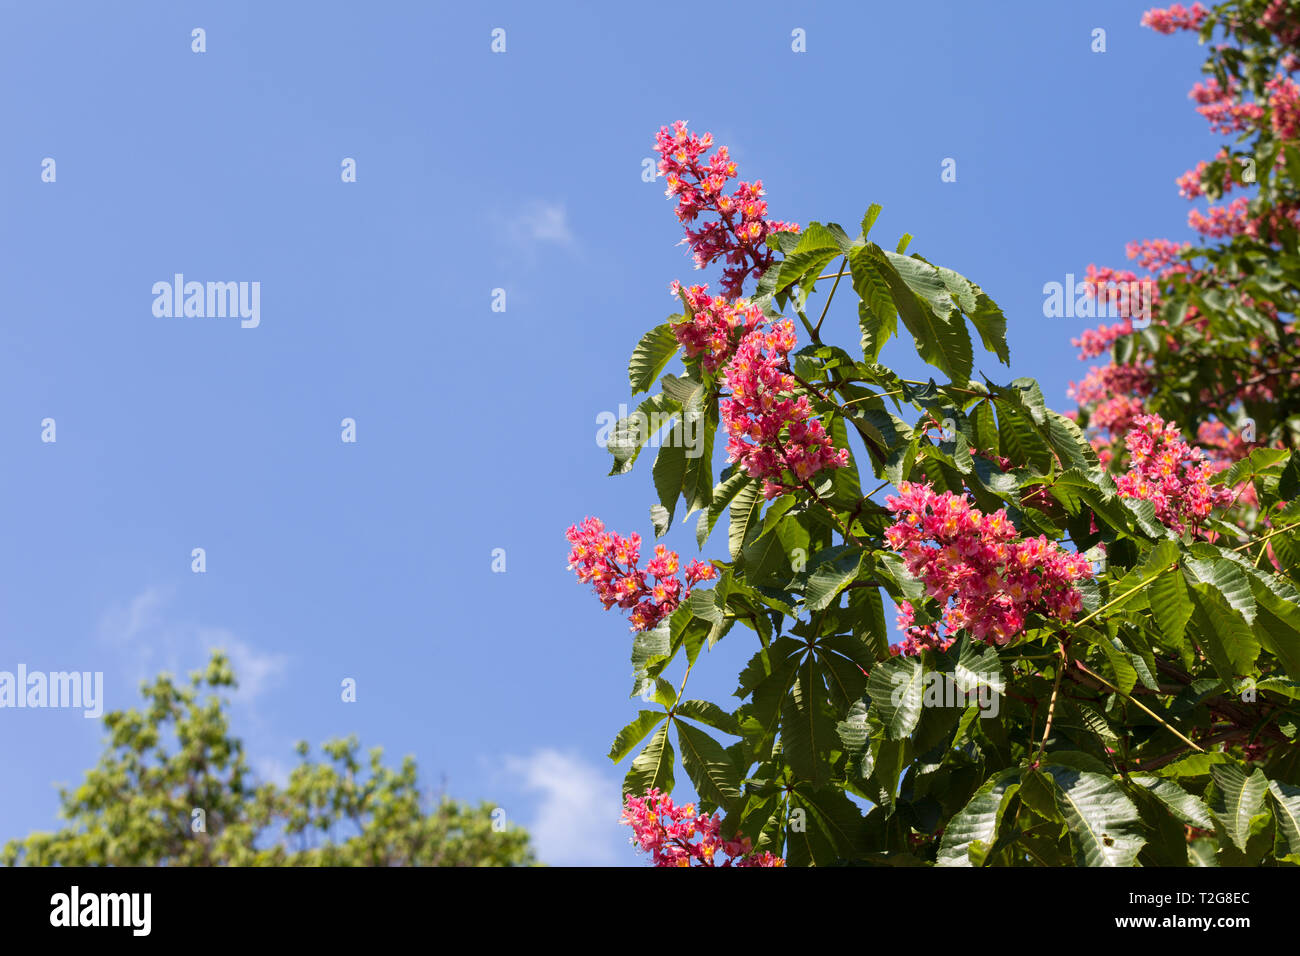 Horse chestnut tree Aesculus carnea with red blossom flowers on blue sky background at sunny spring day. Stock Photo